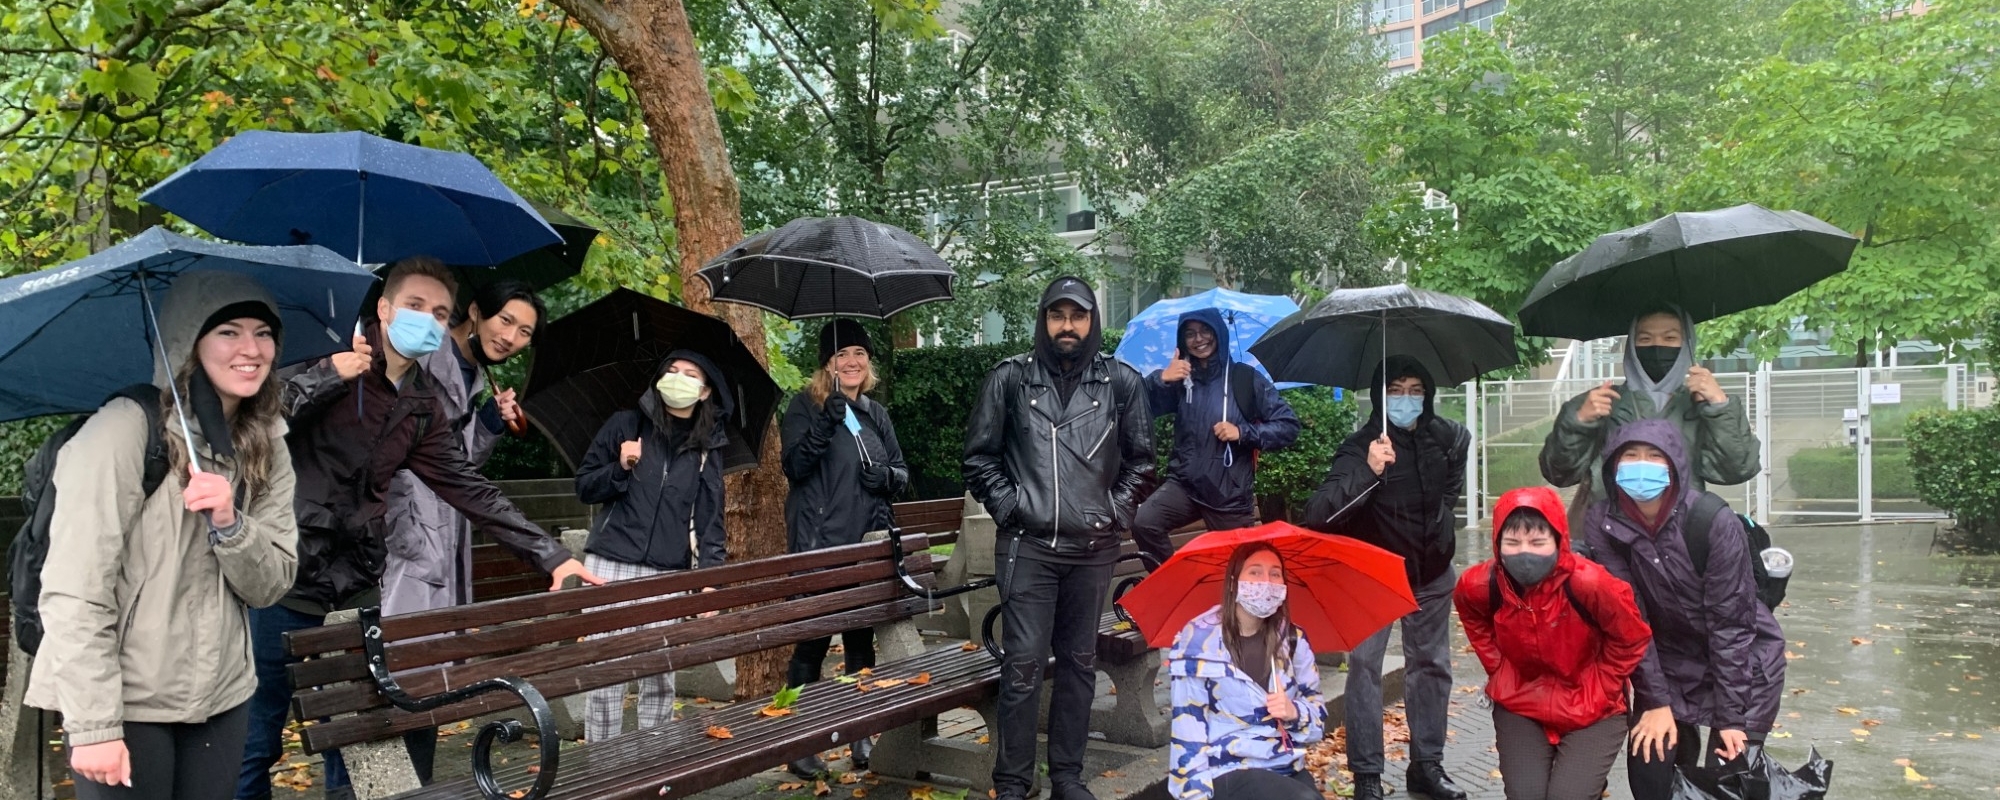 Fall 2021 Semester by the Salish Sea students standing outside behind a bench, it is raining and several students have open umbrellas